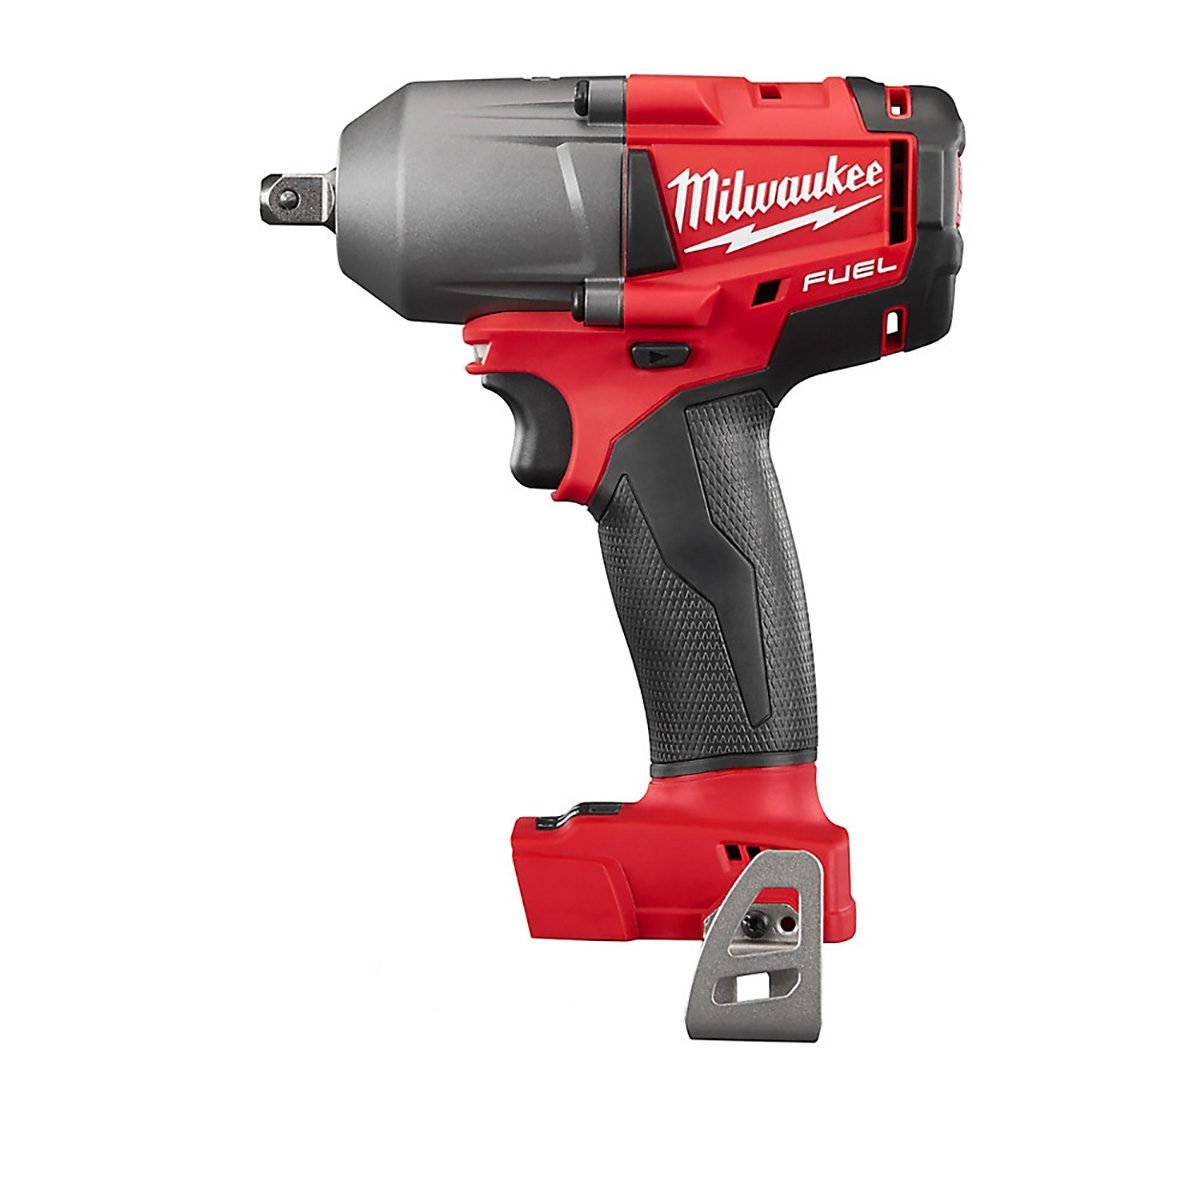 Impact Drill What It Is and When Do You Use it? The Family Handyman